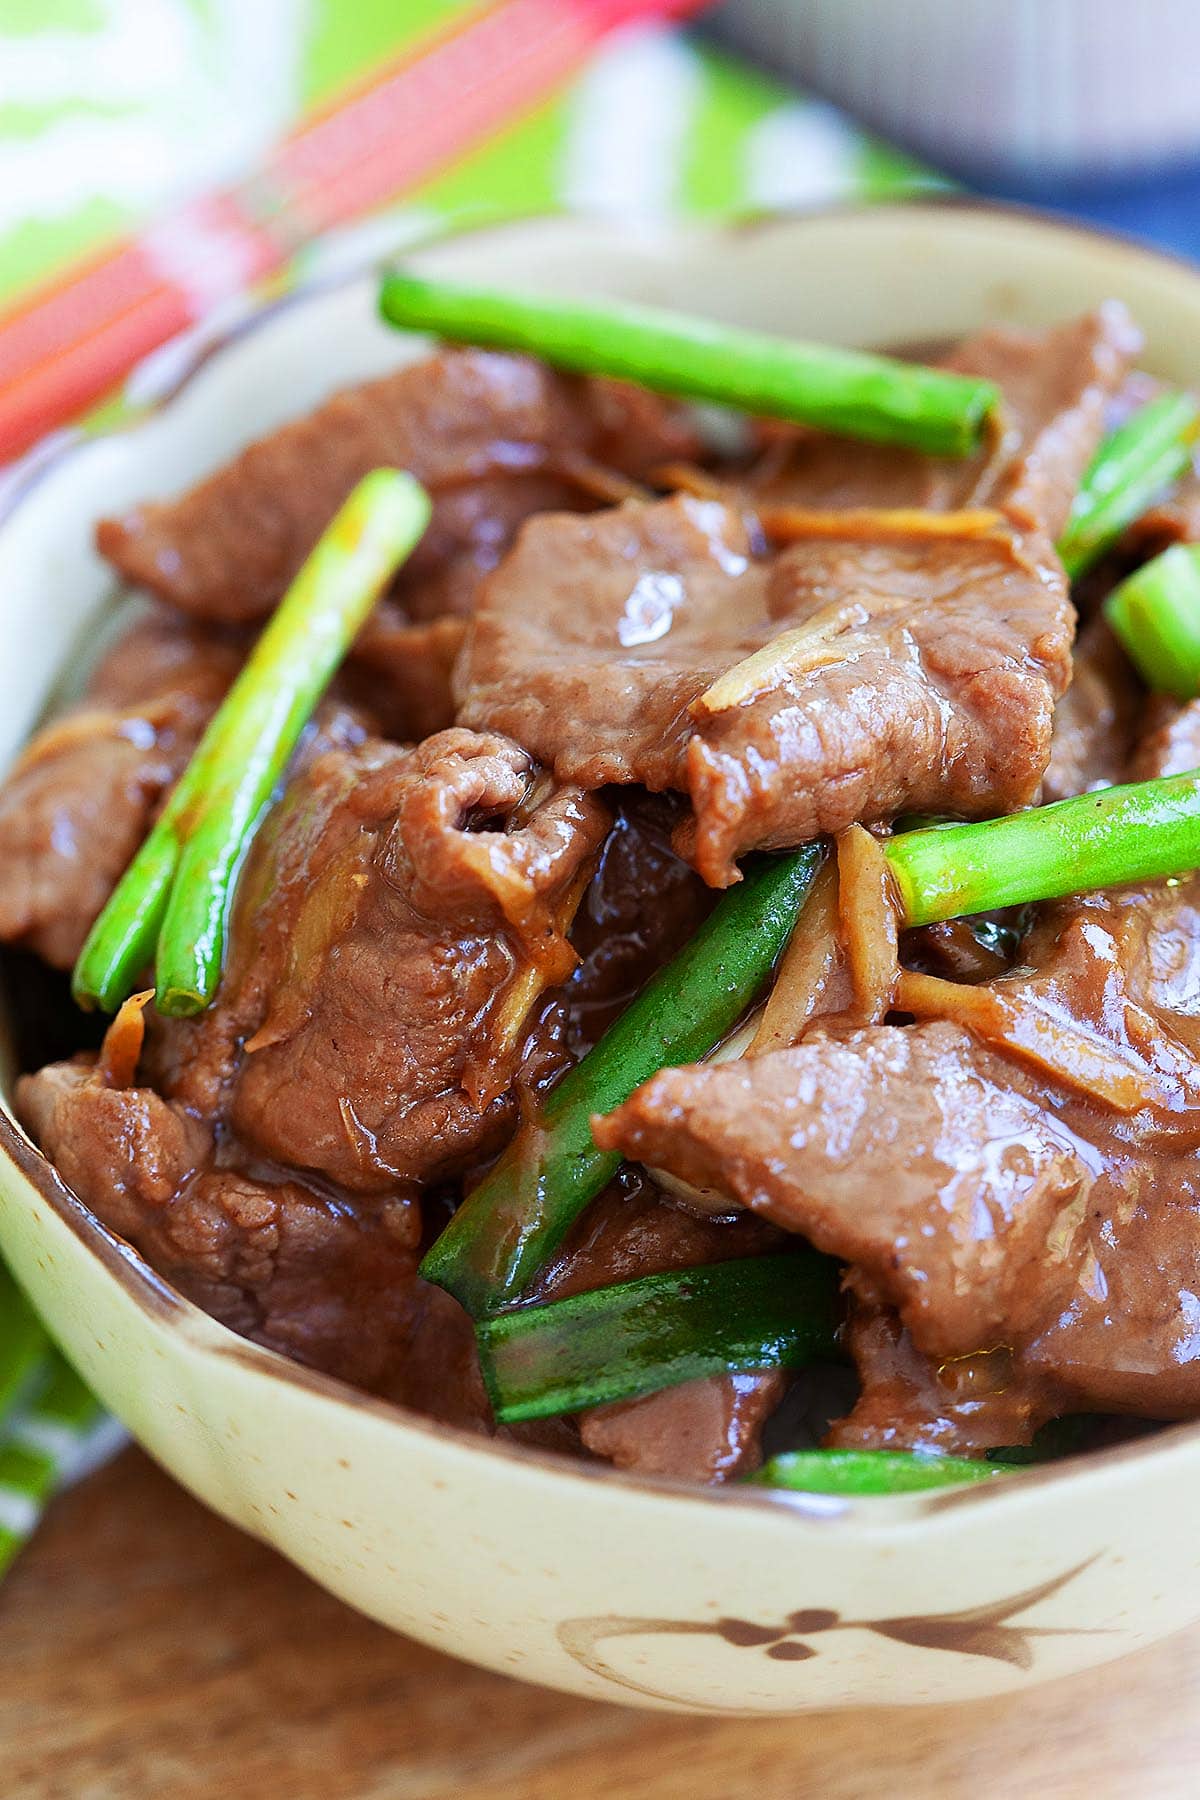 Tender ginger beef topped with green onion.